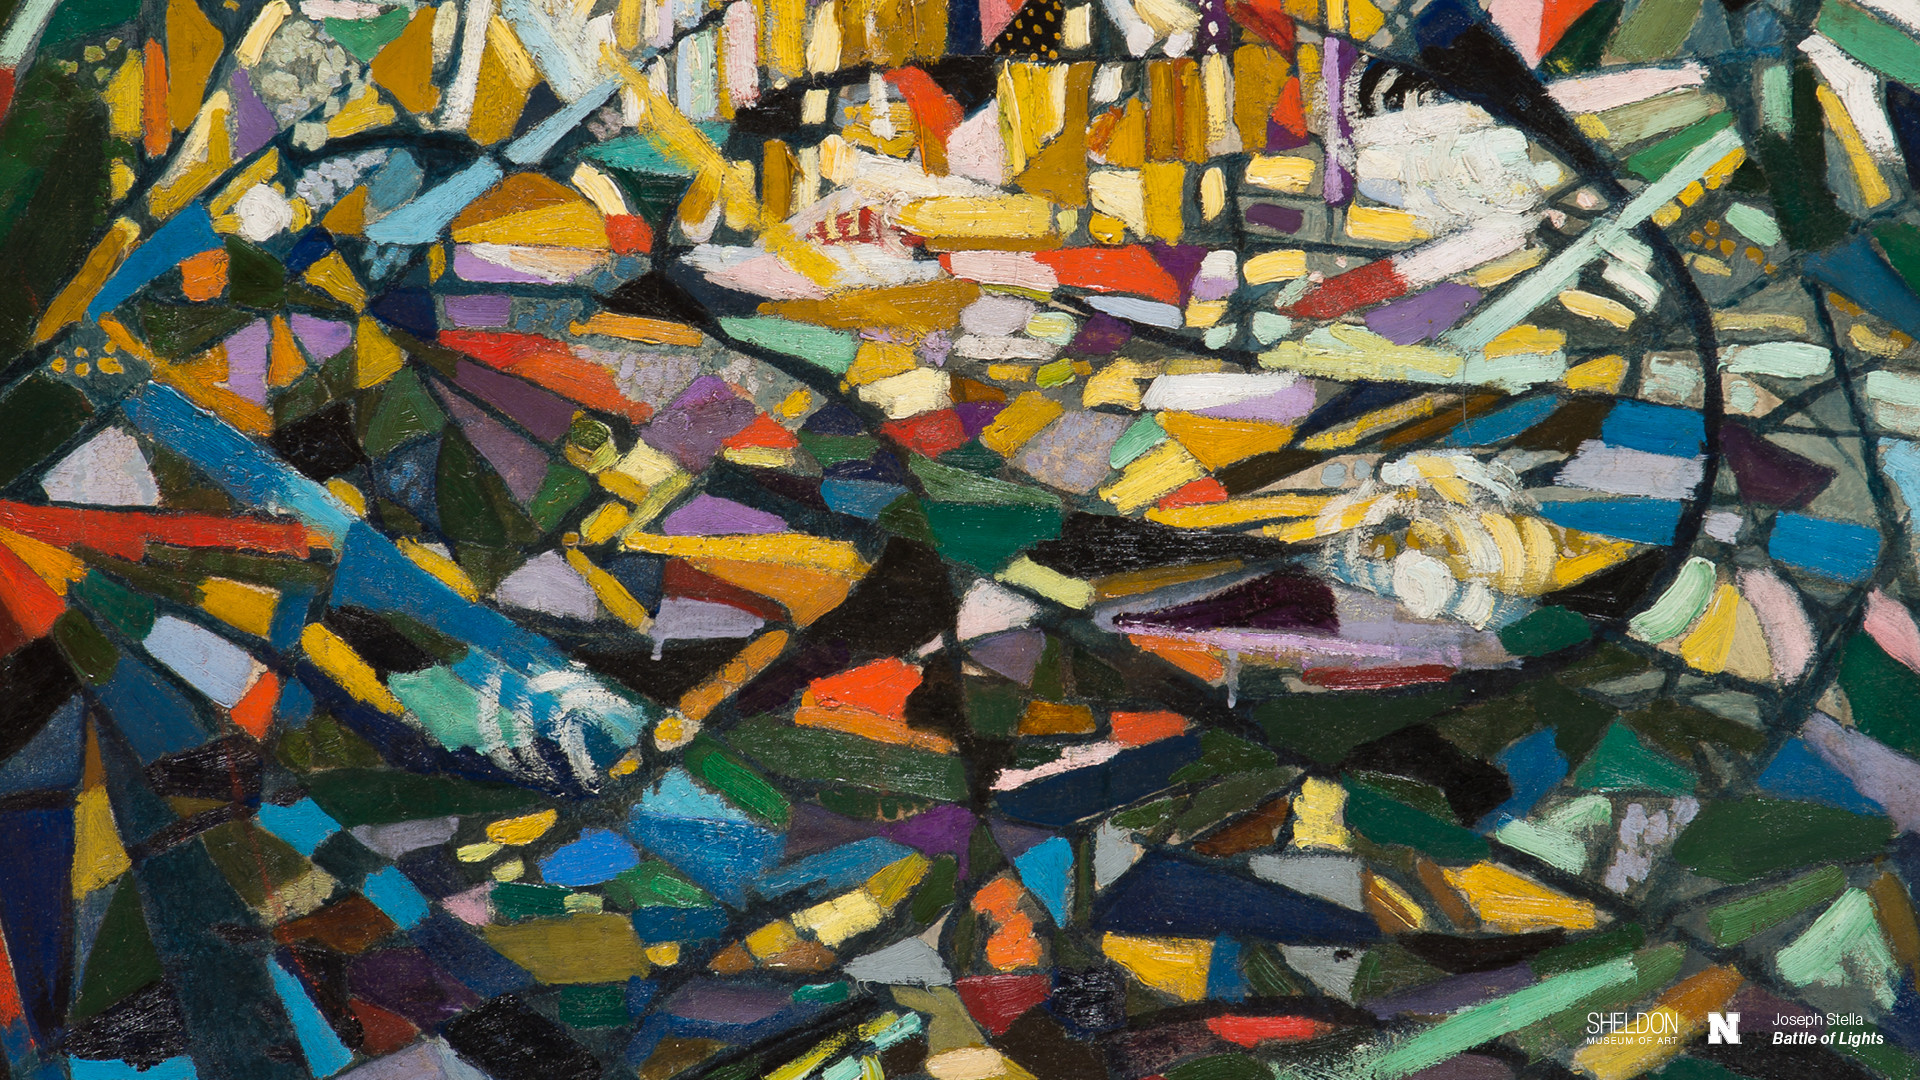 Salads, Sandwiches, and Desserts (detail). Oil on canvas, 1962; 55 3/16 x  72 3/16 inches. Nebraska Art Association, Thomas C. Woods Memorial,  N-138.1962.